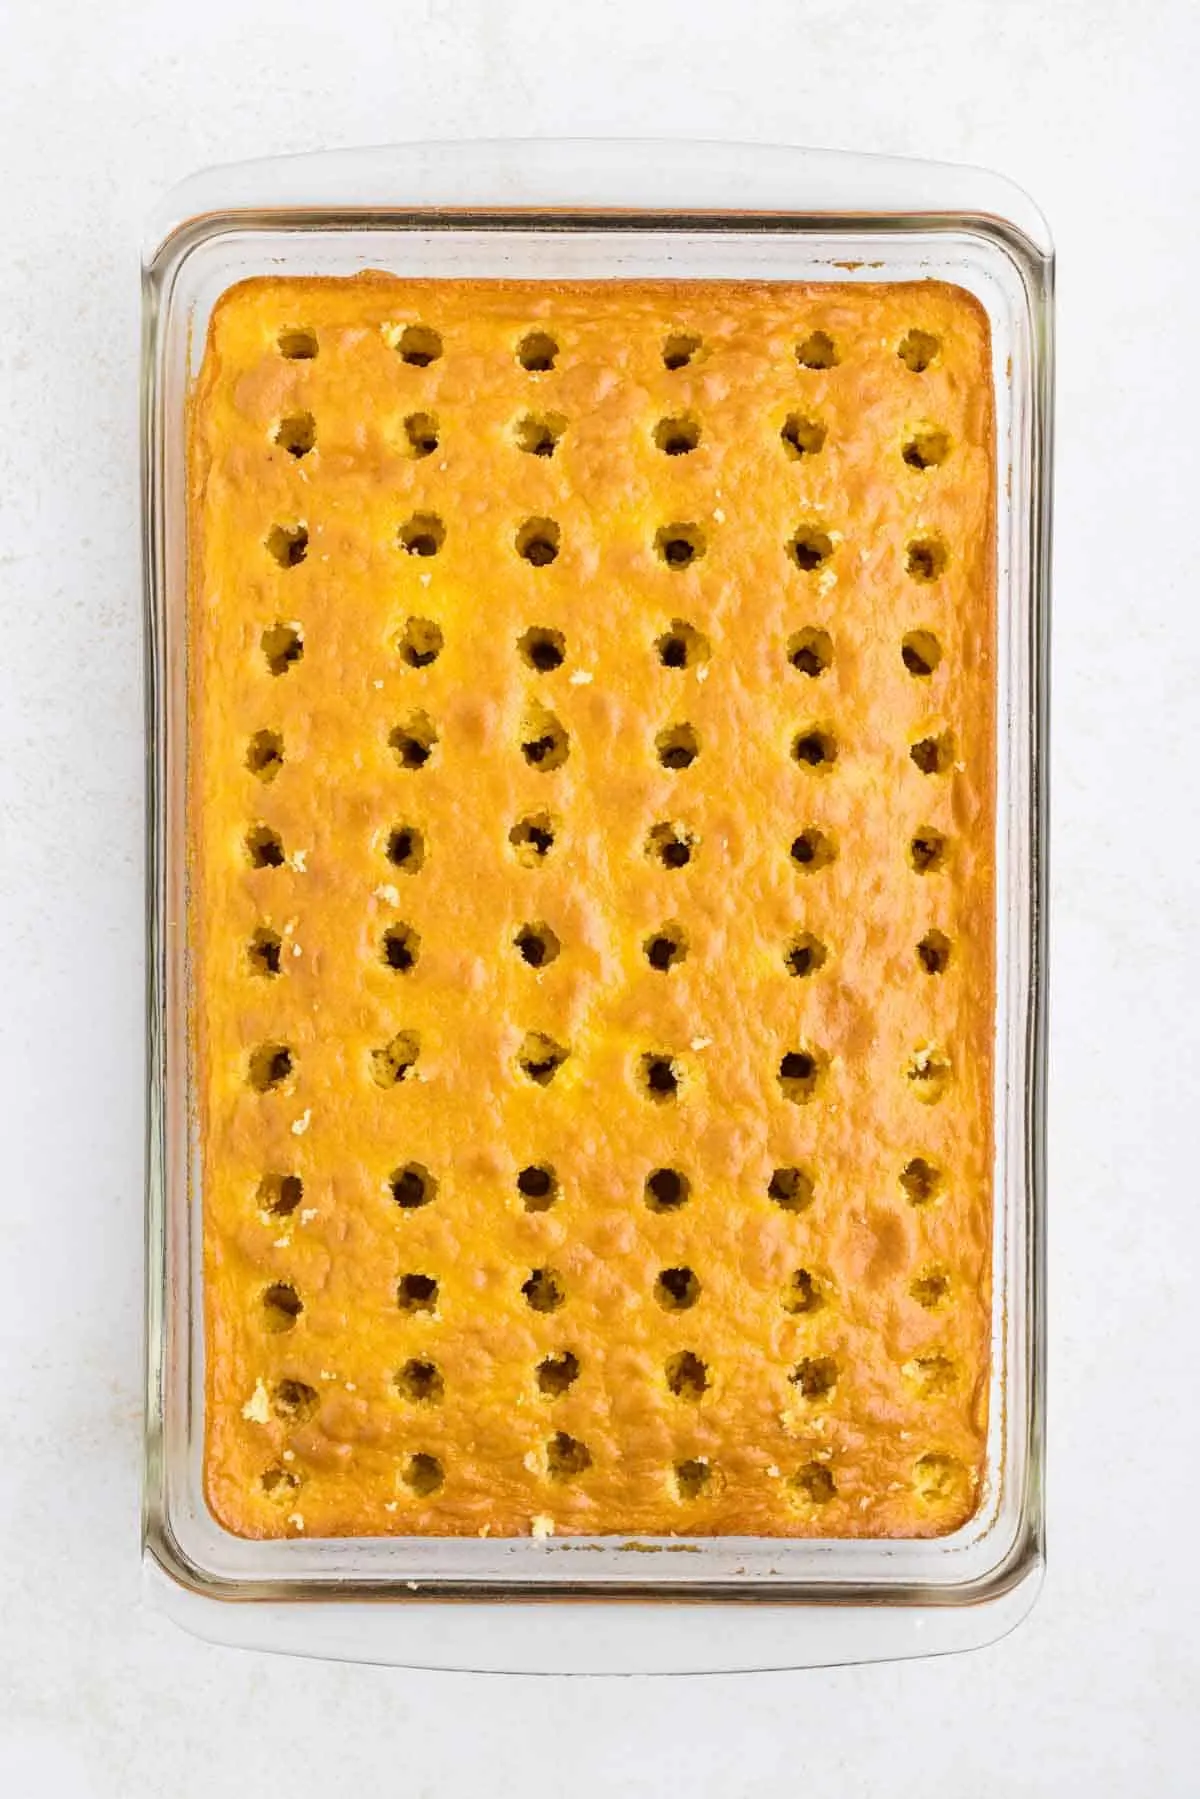 rows of holes poked in a lemon cake